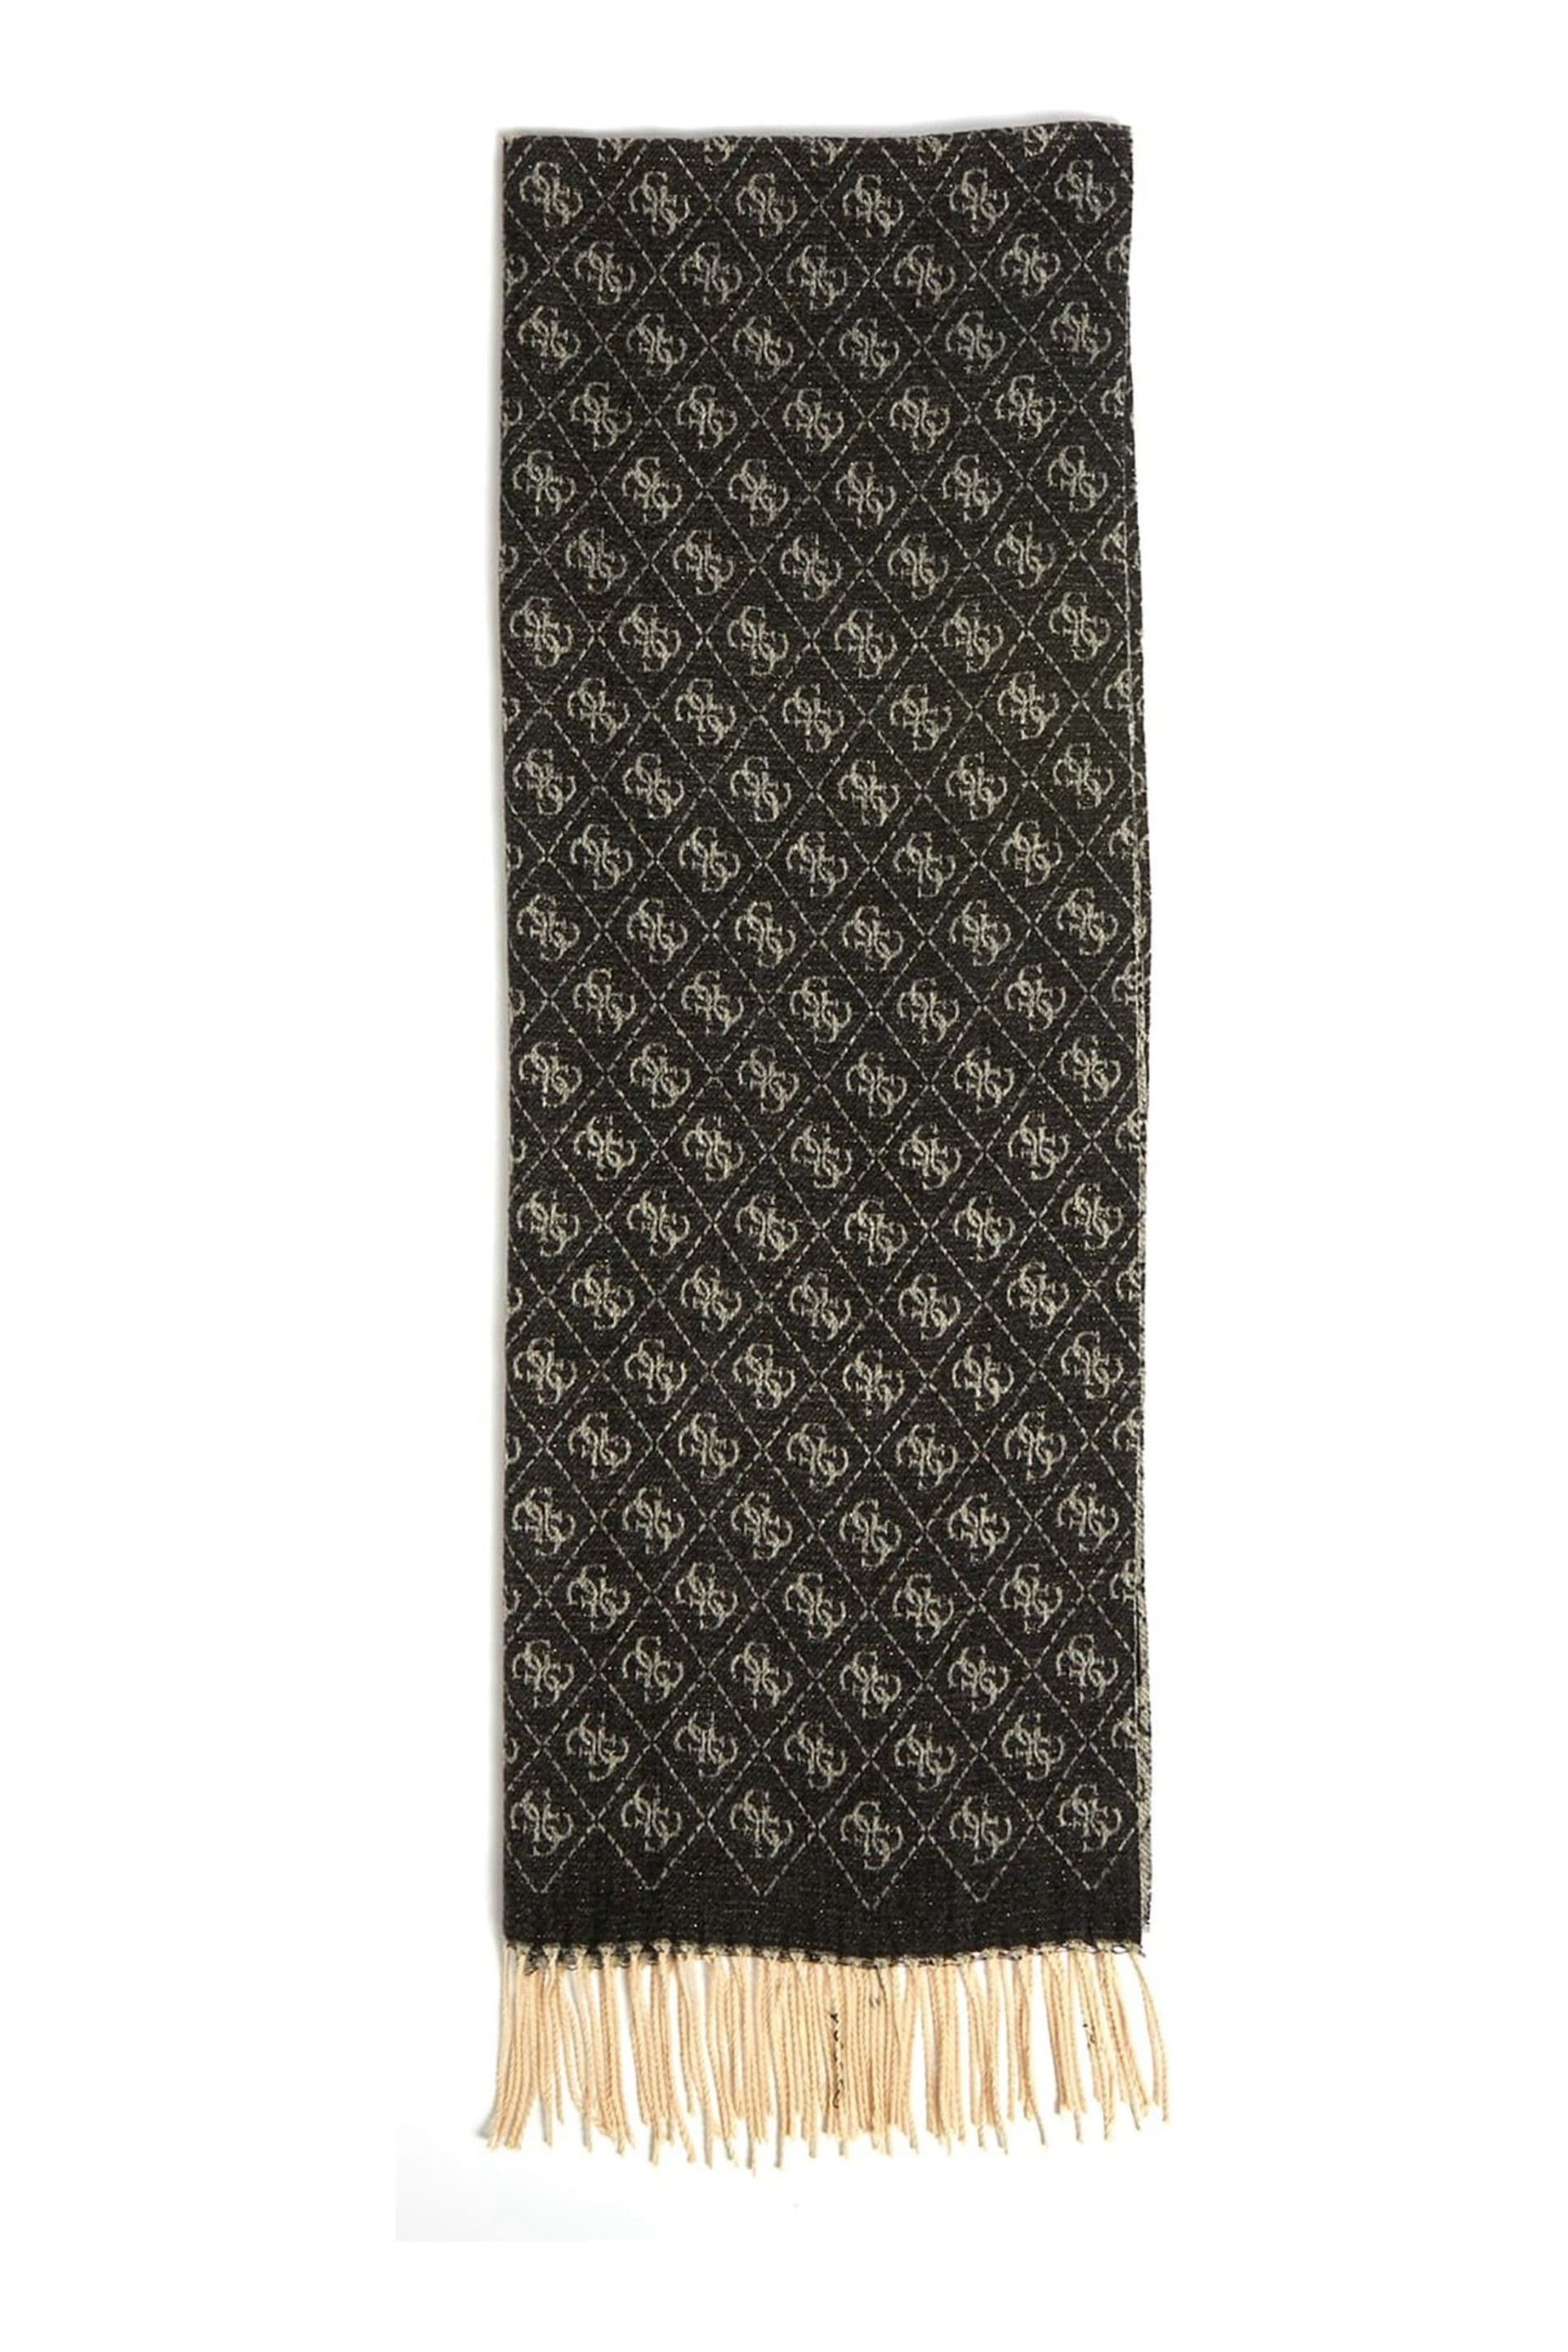 Guess Noelle Brown Scarf - Image 2 of 2